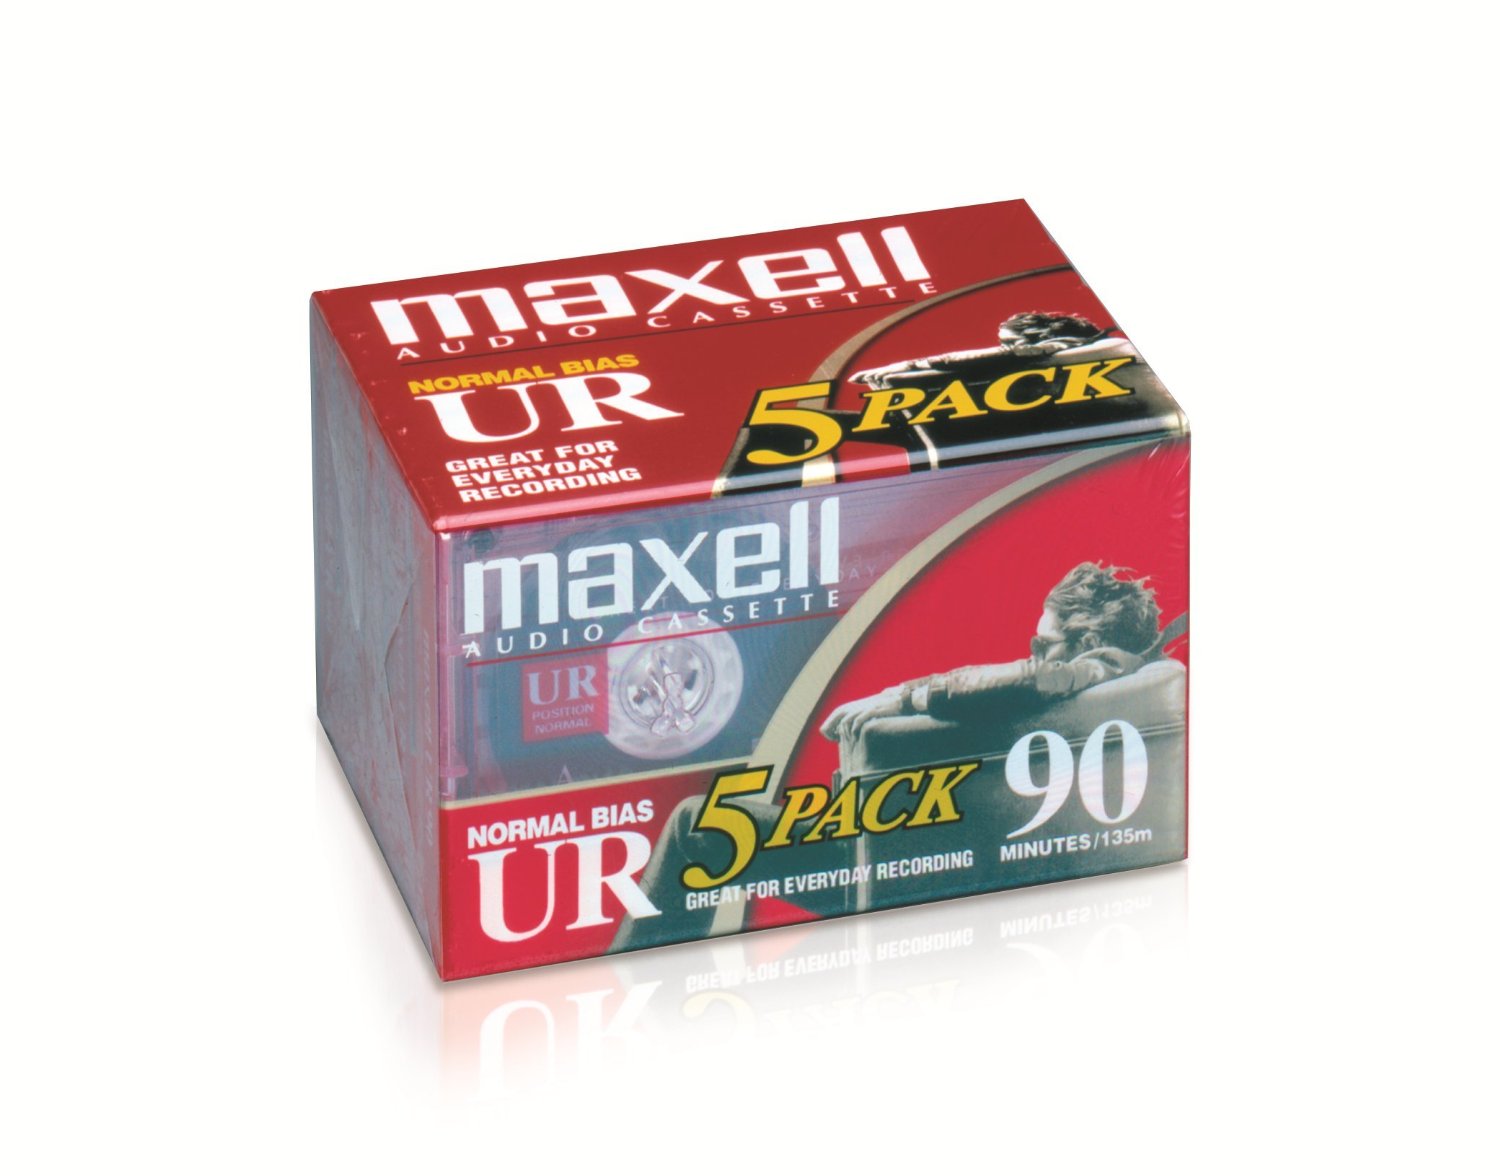 Maxell UR 90 Cassette Audio Tape, 90-Minute Normal Bias Standard, Pack Of 5